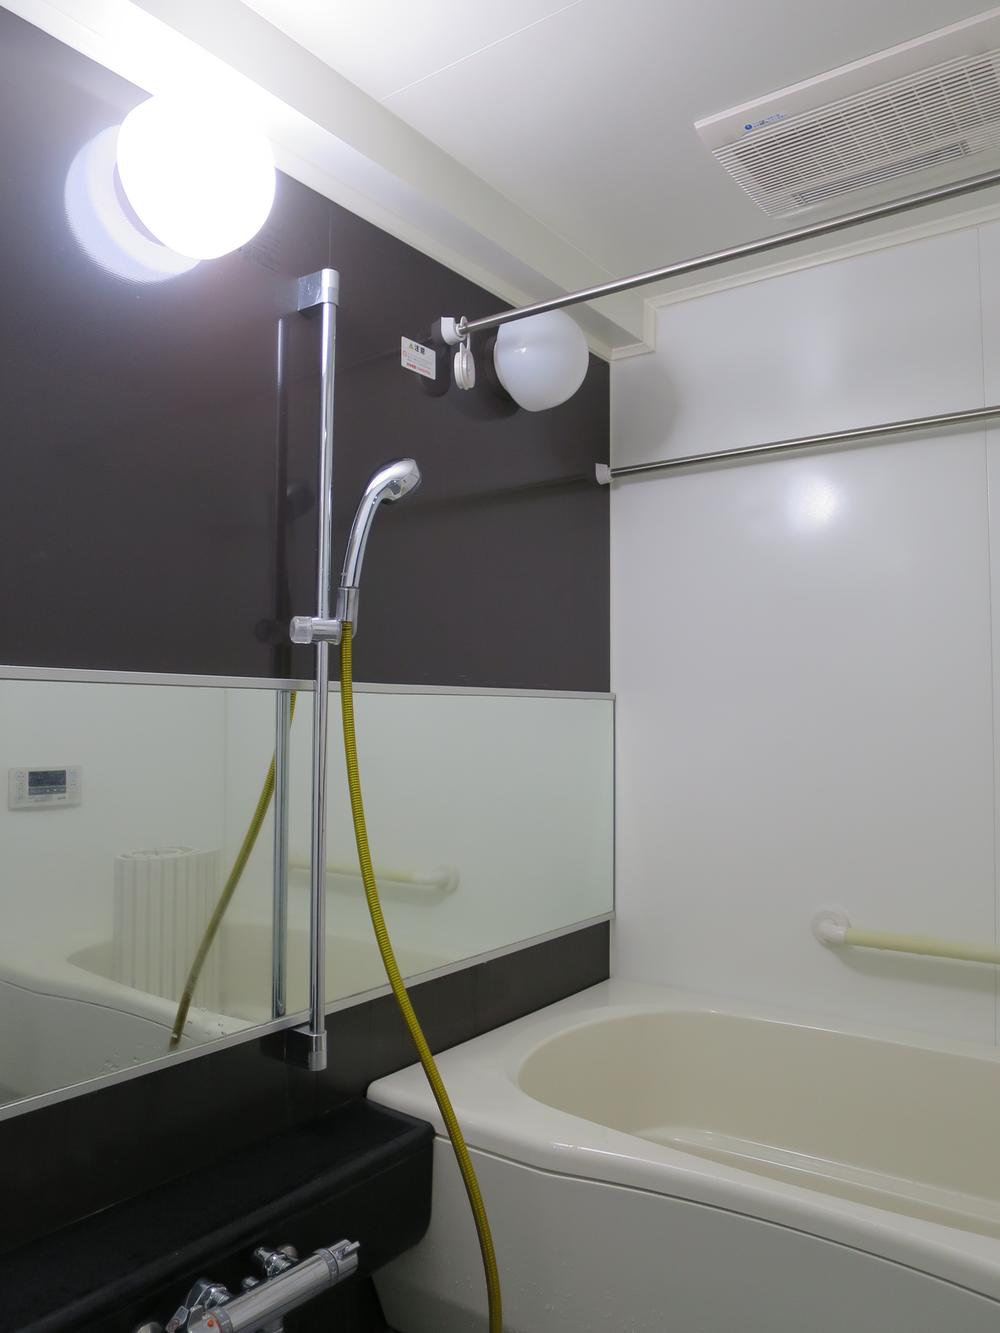 Bathroom. Bathroom is carefully your. 1418 size is a low-floor type. Bathroom Dryer ・ Cold blast ・ heating ・ With ventilation function